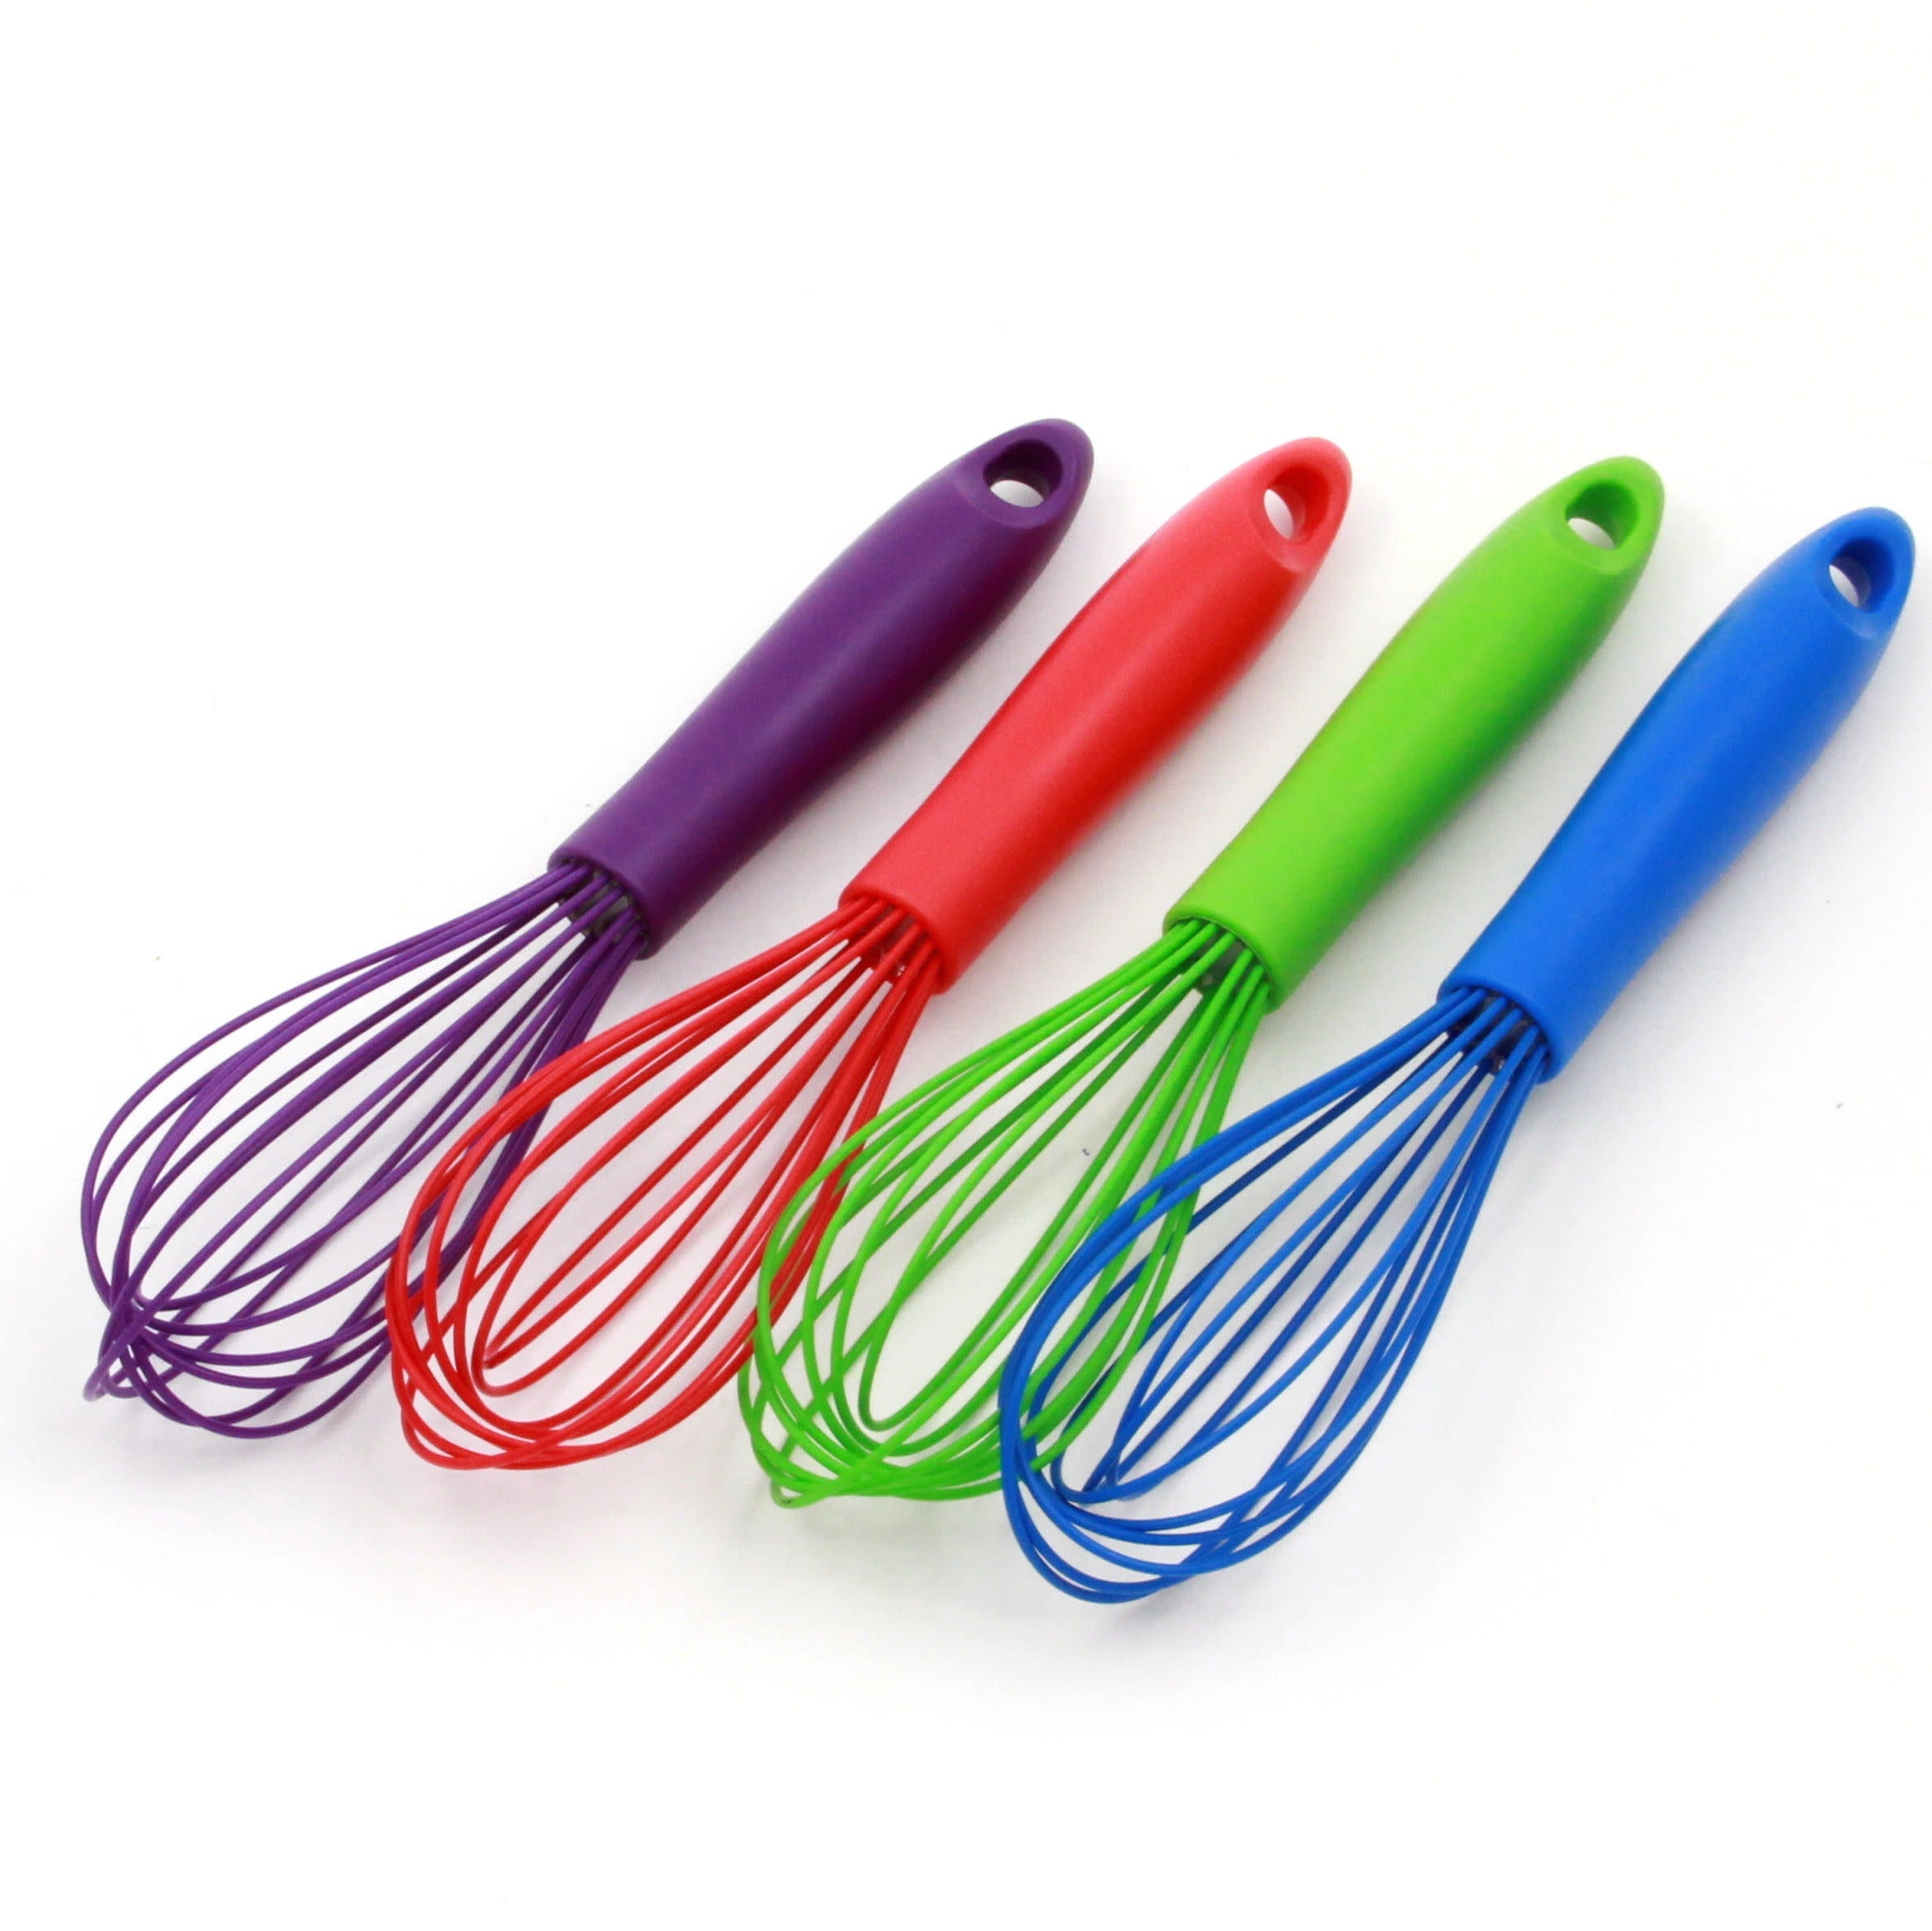 Thuse Thsue Kitchen Premium Silicone Whisk with Heat Resistant Non-Stick Silicone Whisk Cook